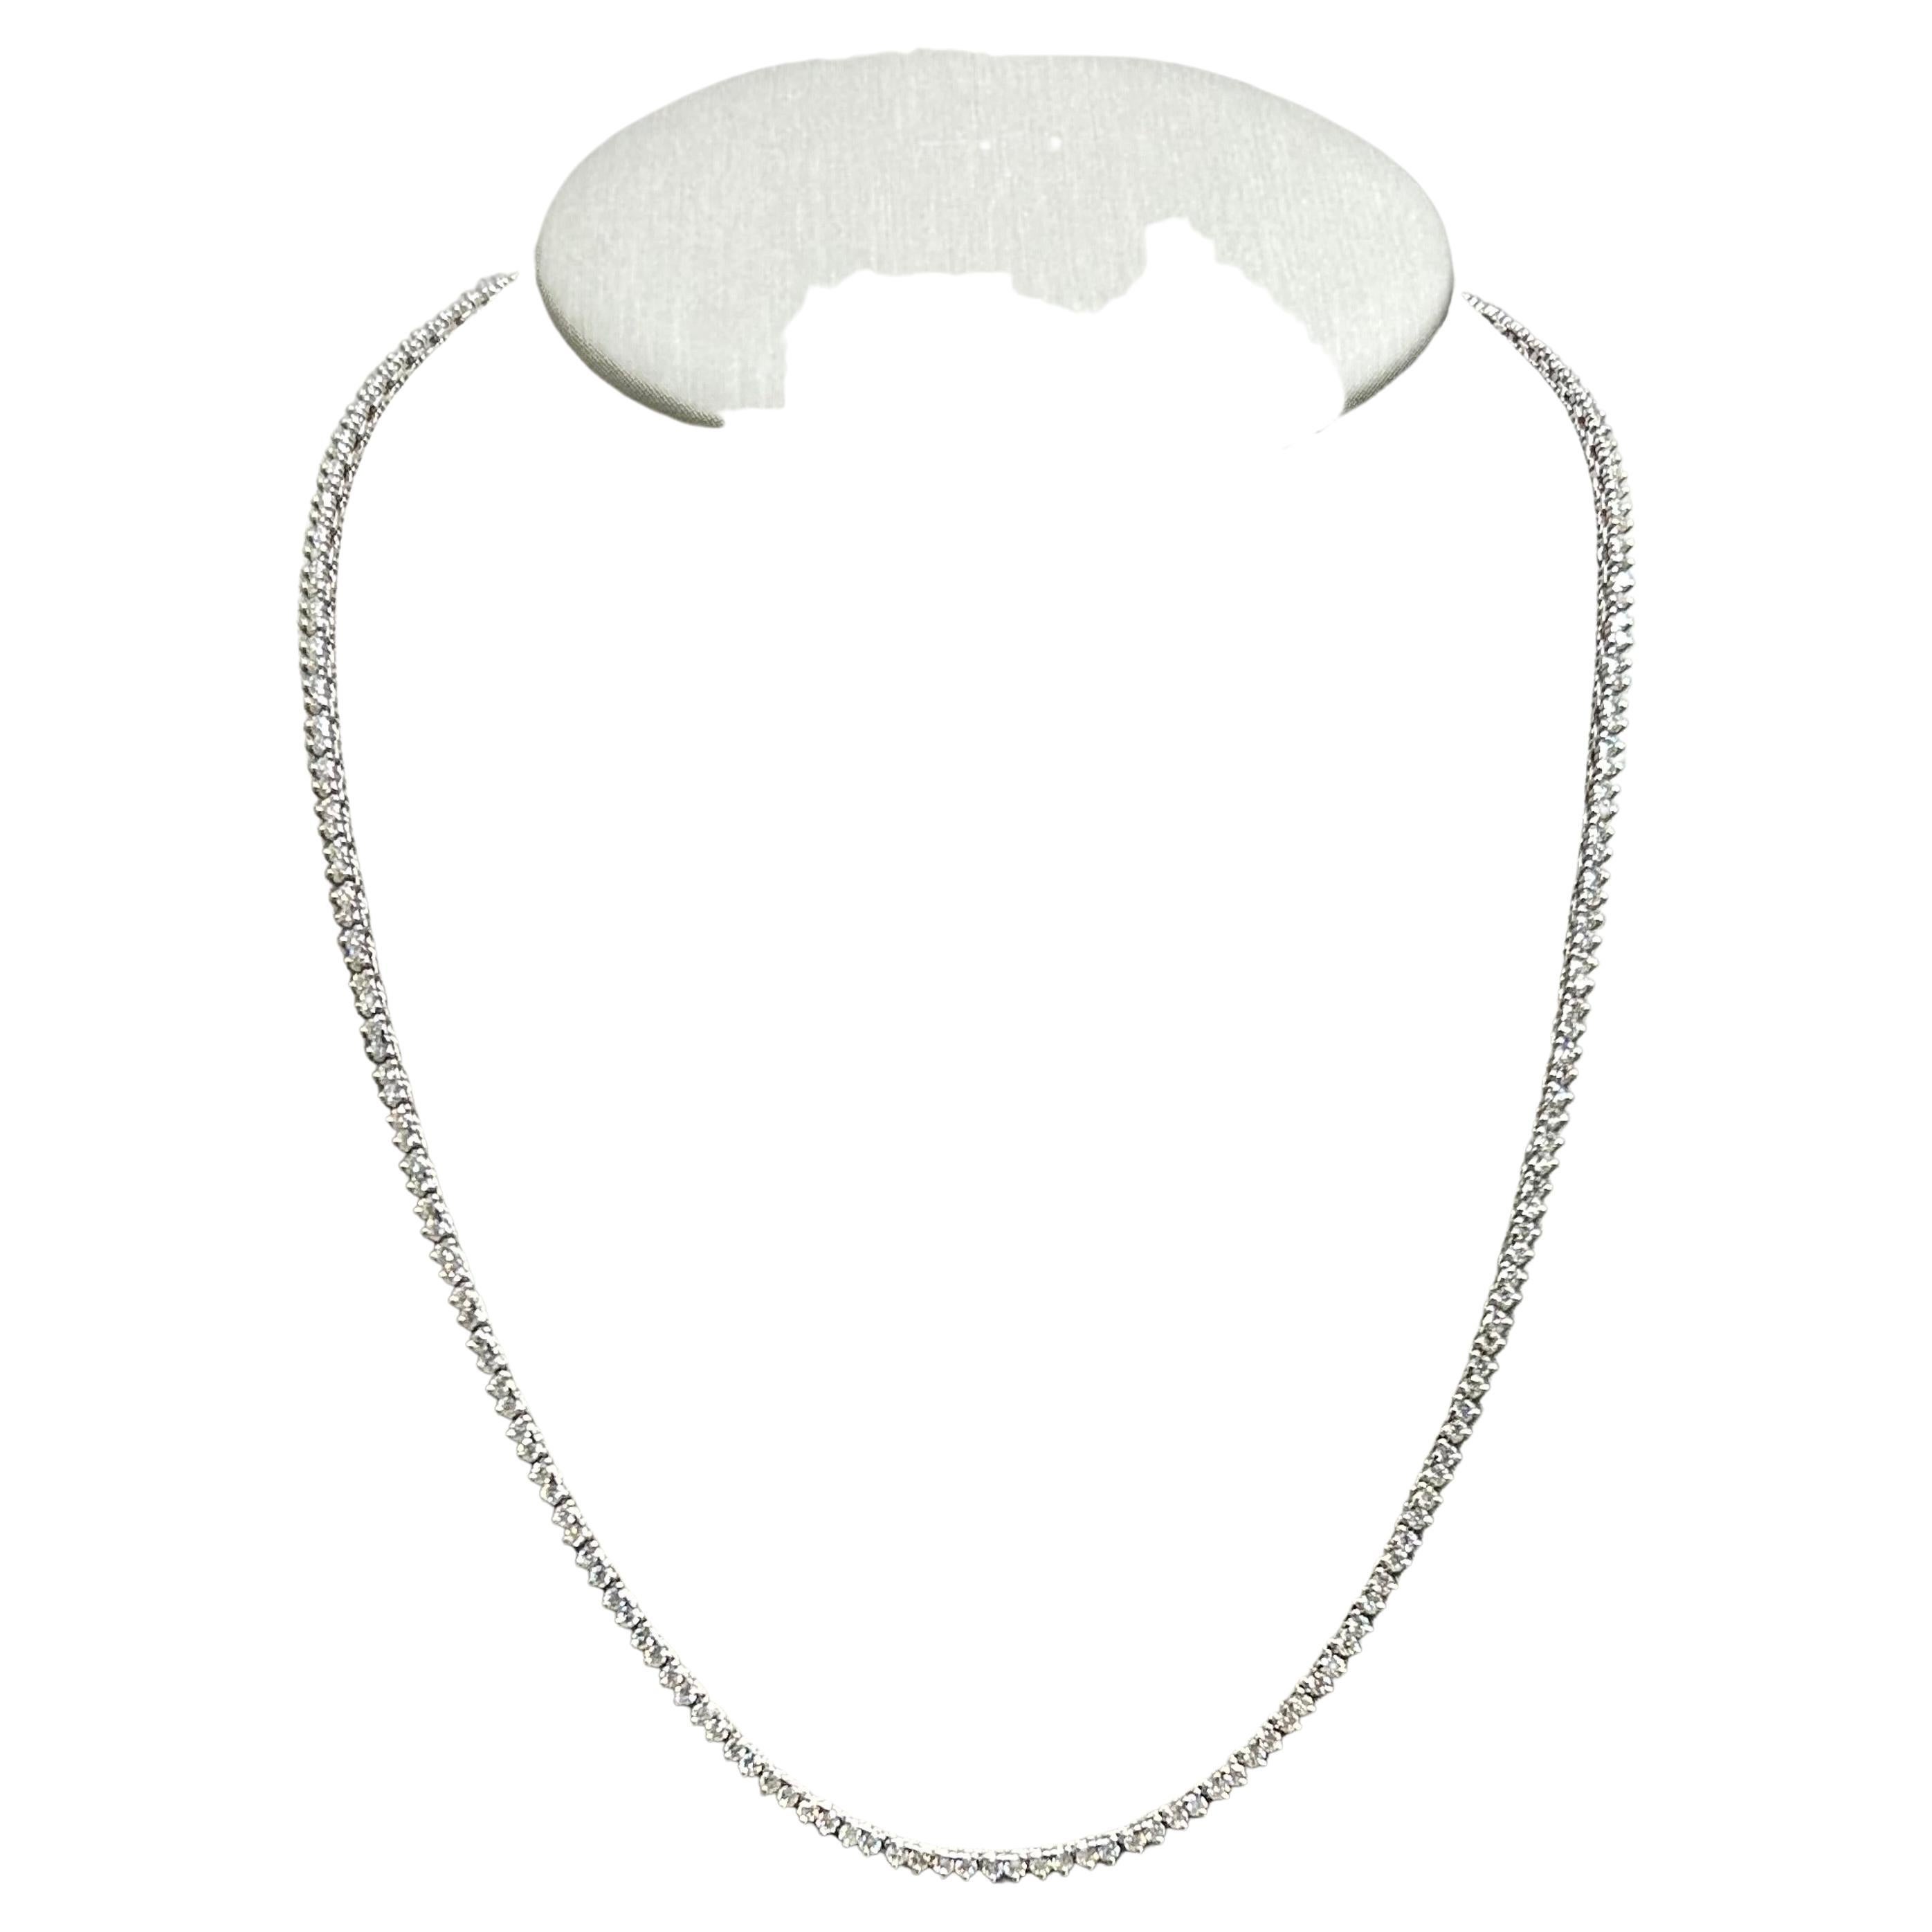 21 Inch Diamond Tennis Necklace In White Gold , 4 , 6 TCW